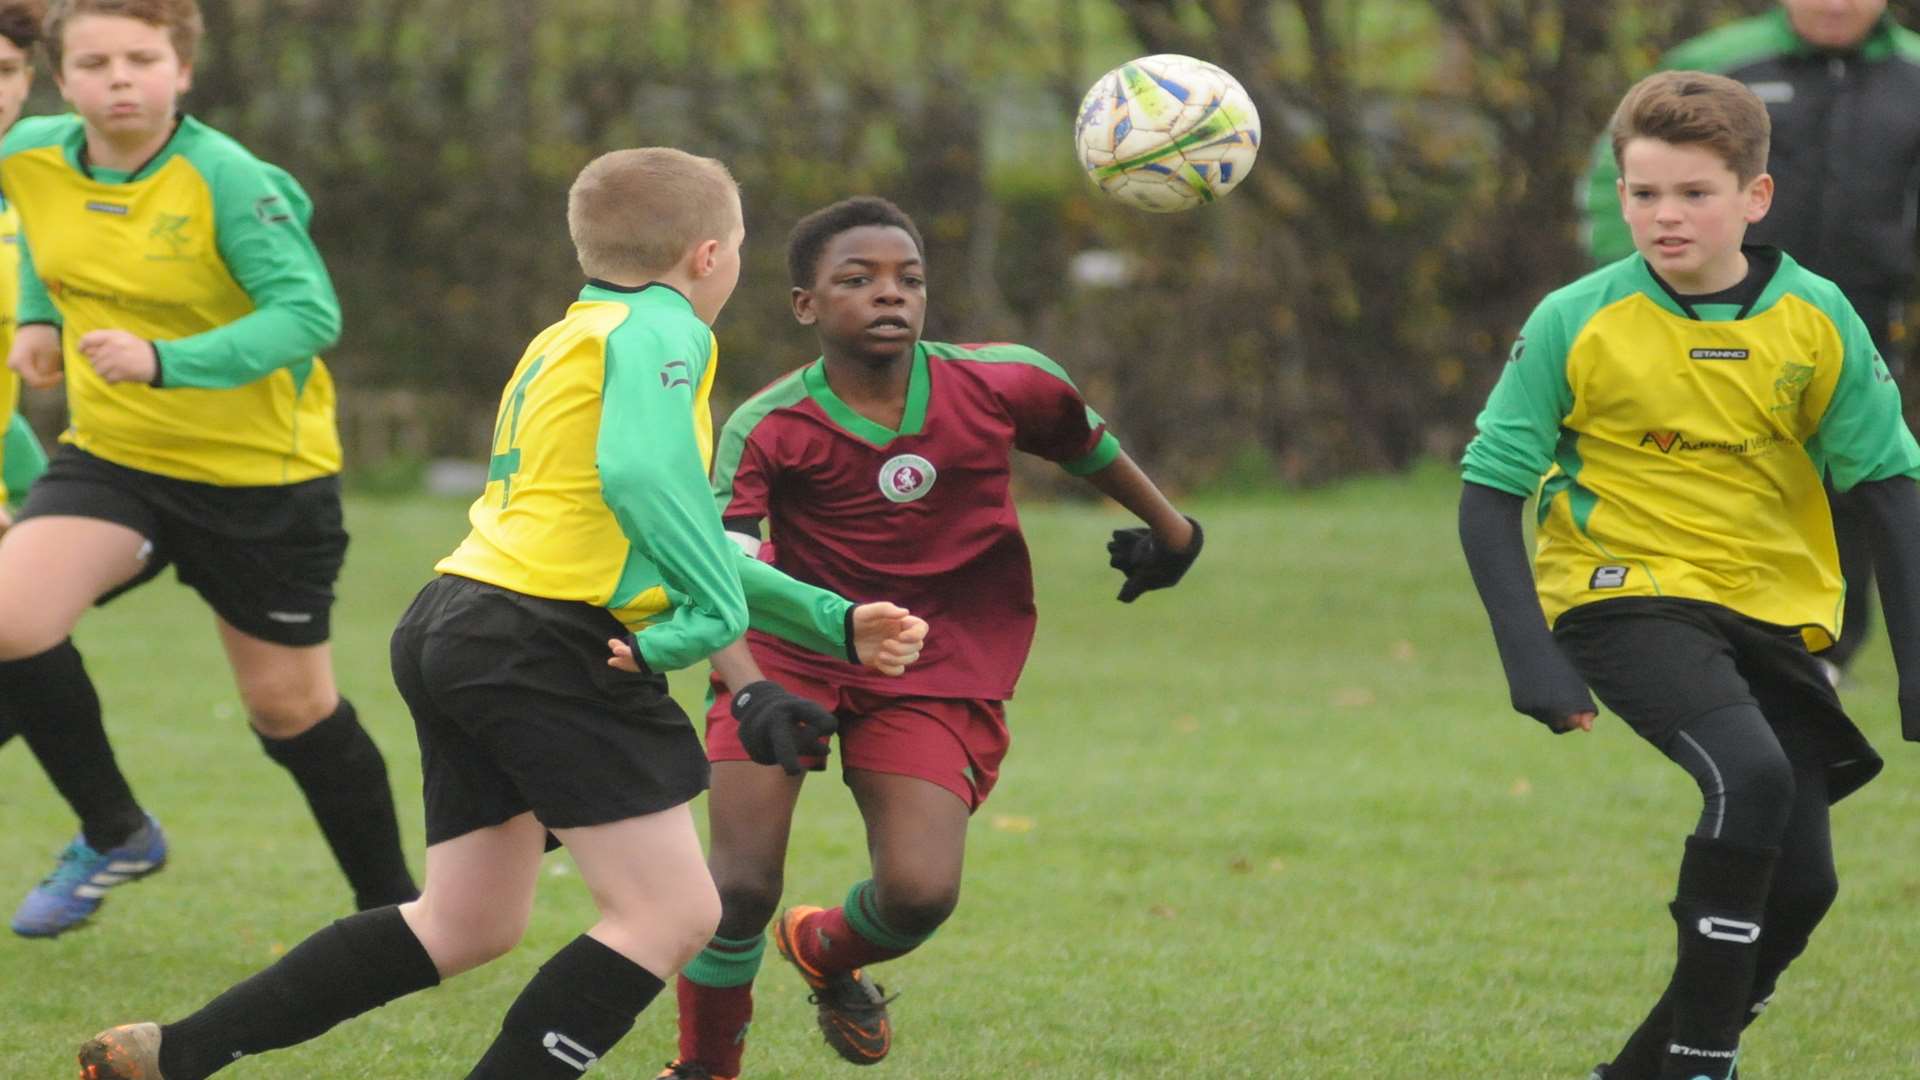 Pegasus 81 Flyers and Cobham Colts contest the points in Under-13 Division 3 Picture: Steve Crispe